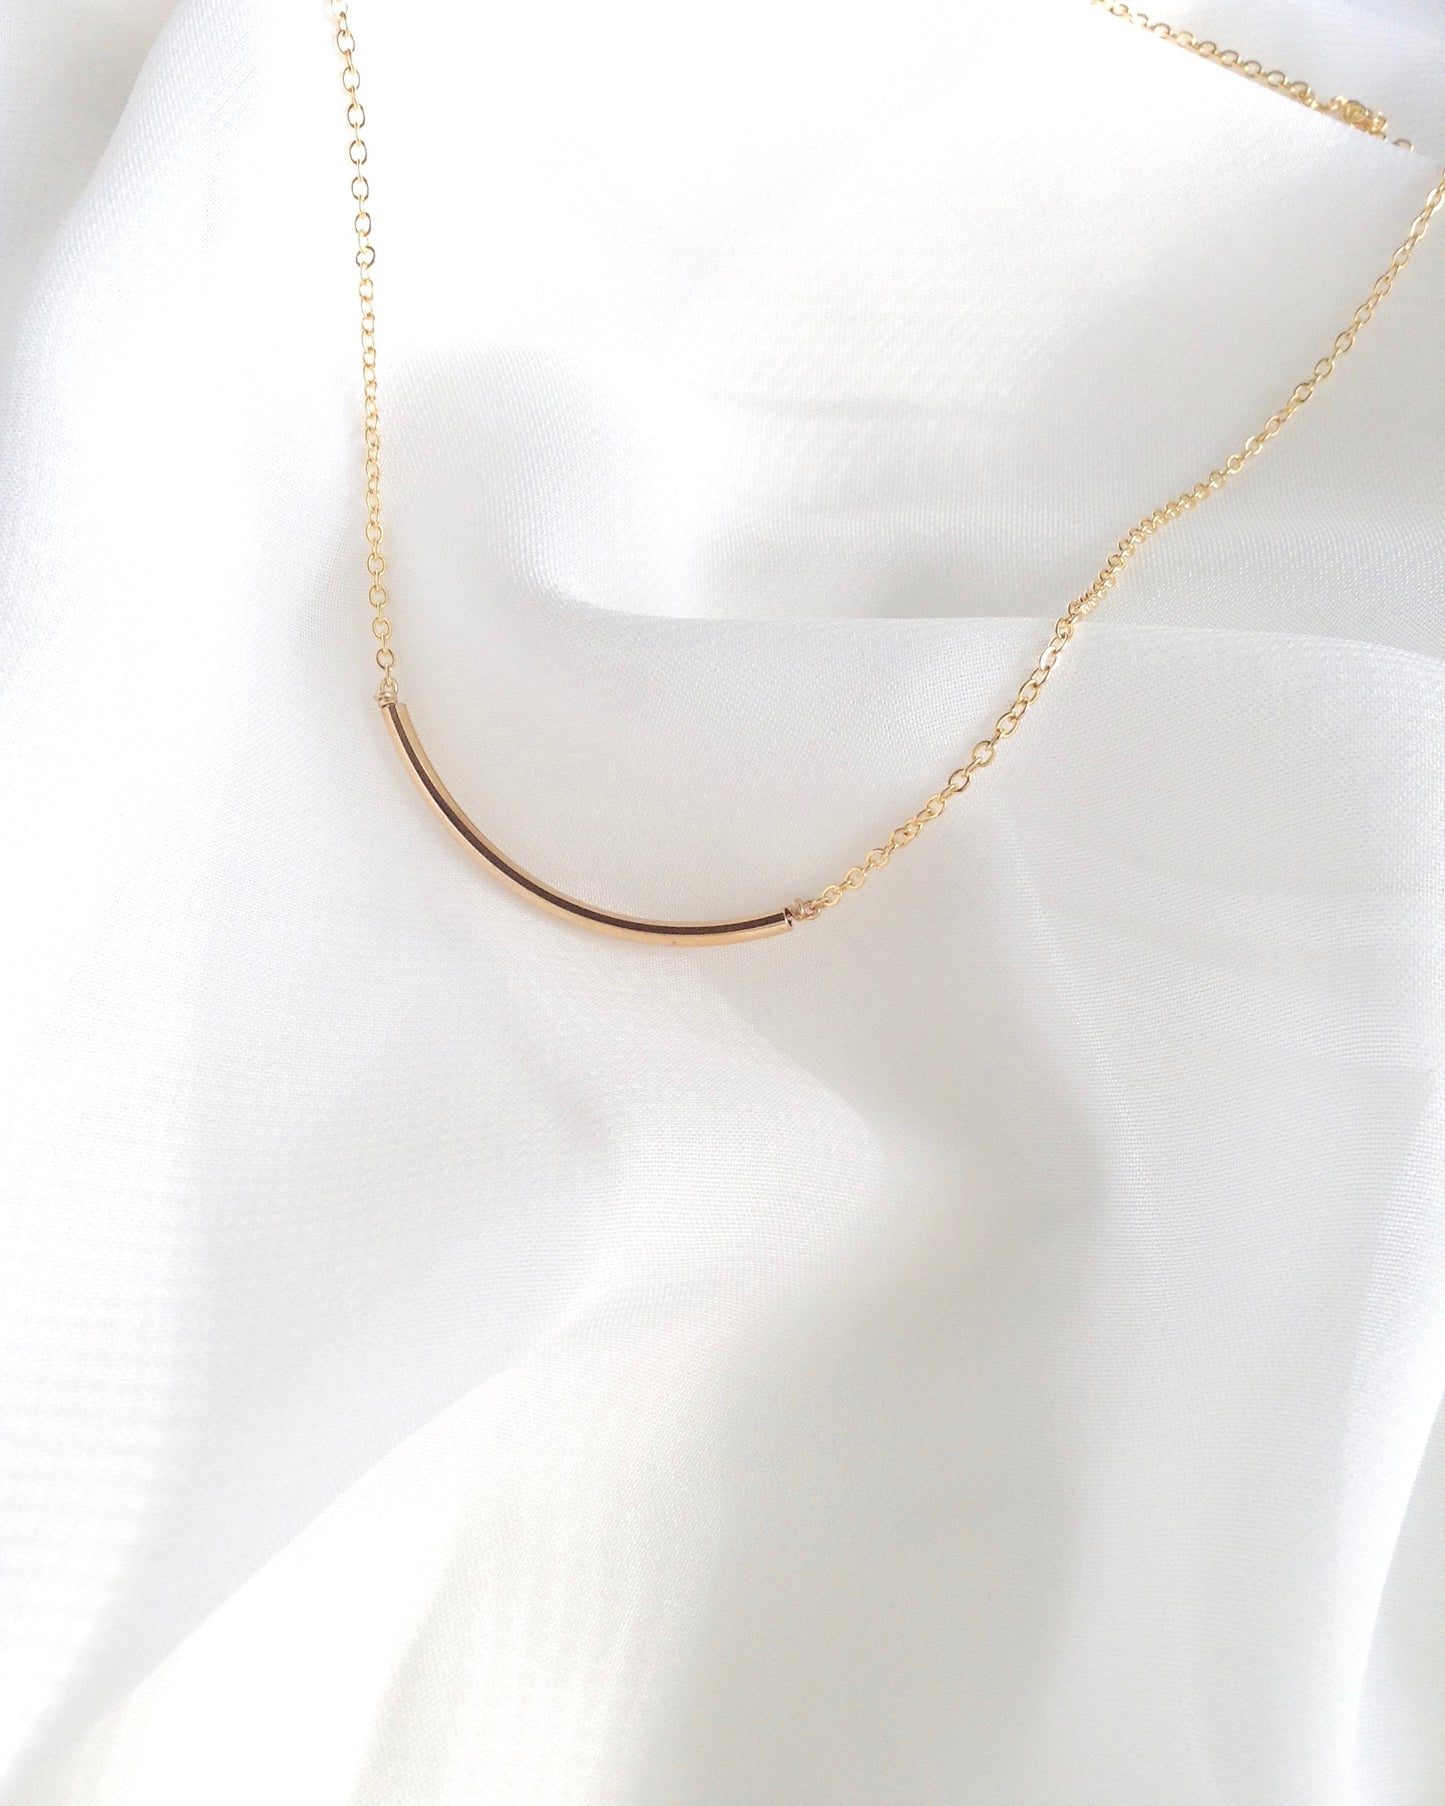 Curved Bar Simple Delicate Necklace in Gold Filled or Sterling Silver | IB Jewelry